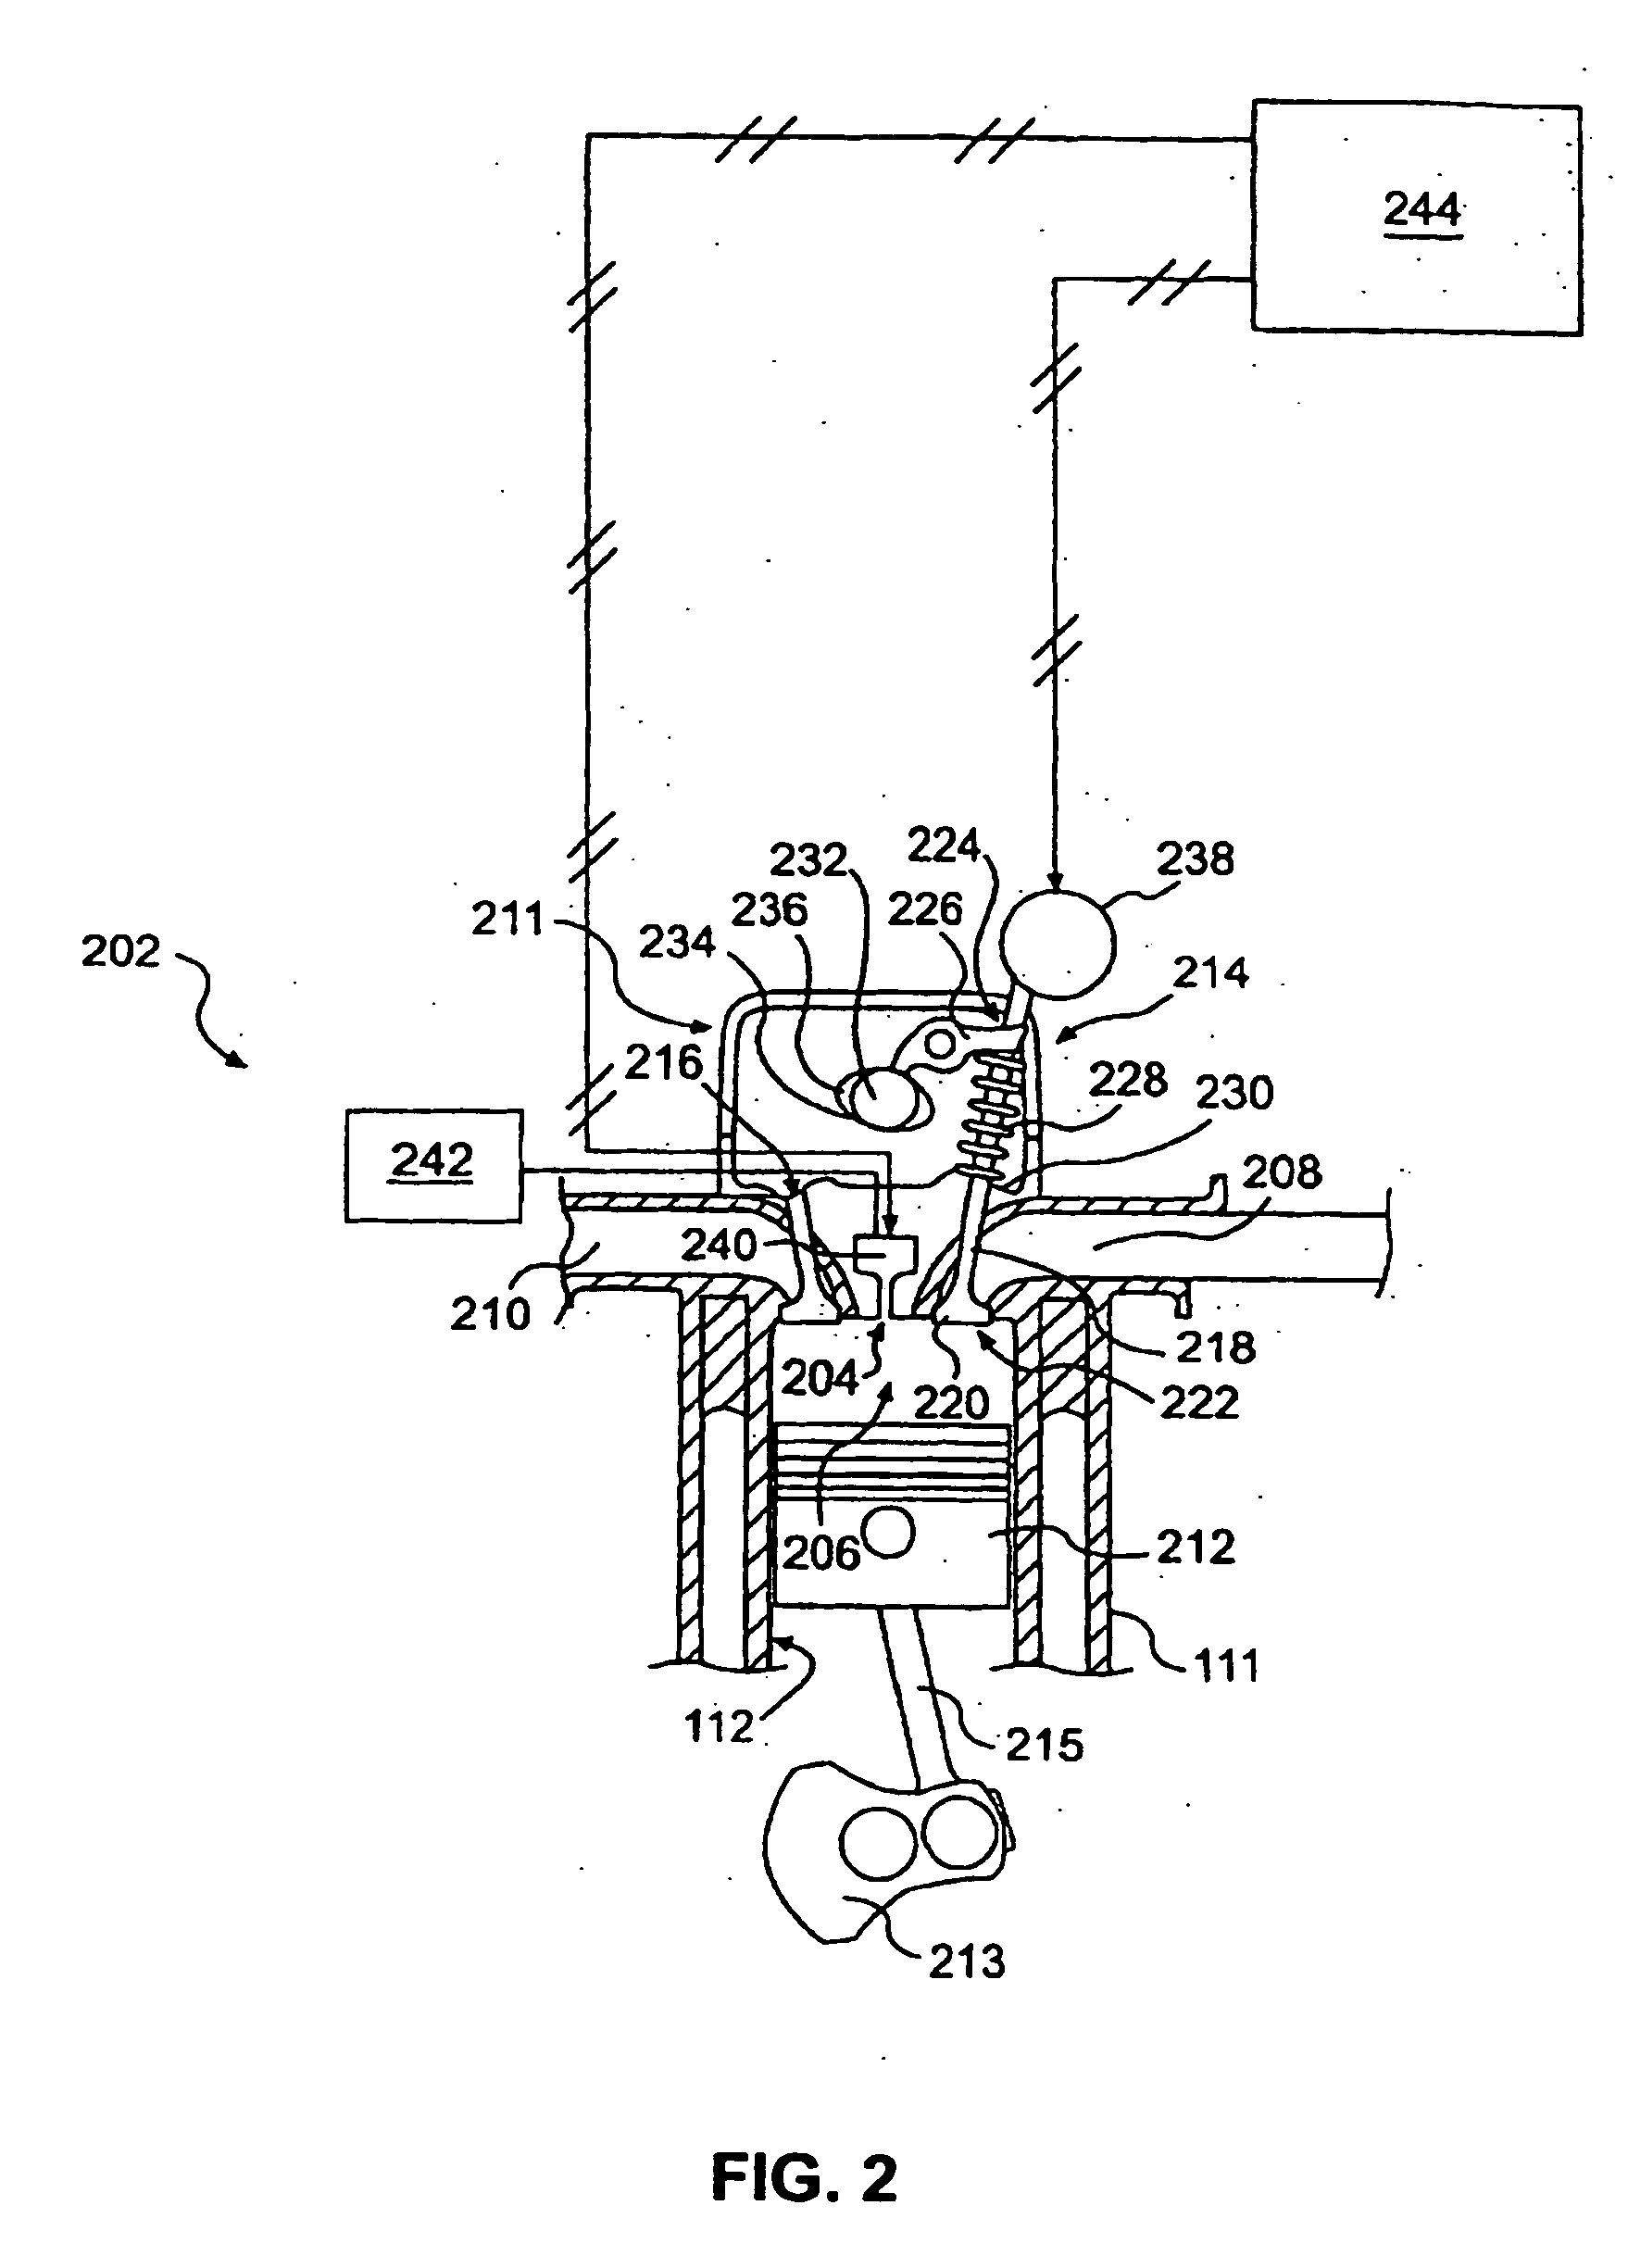 Combustion engine including engine valve actuation system